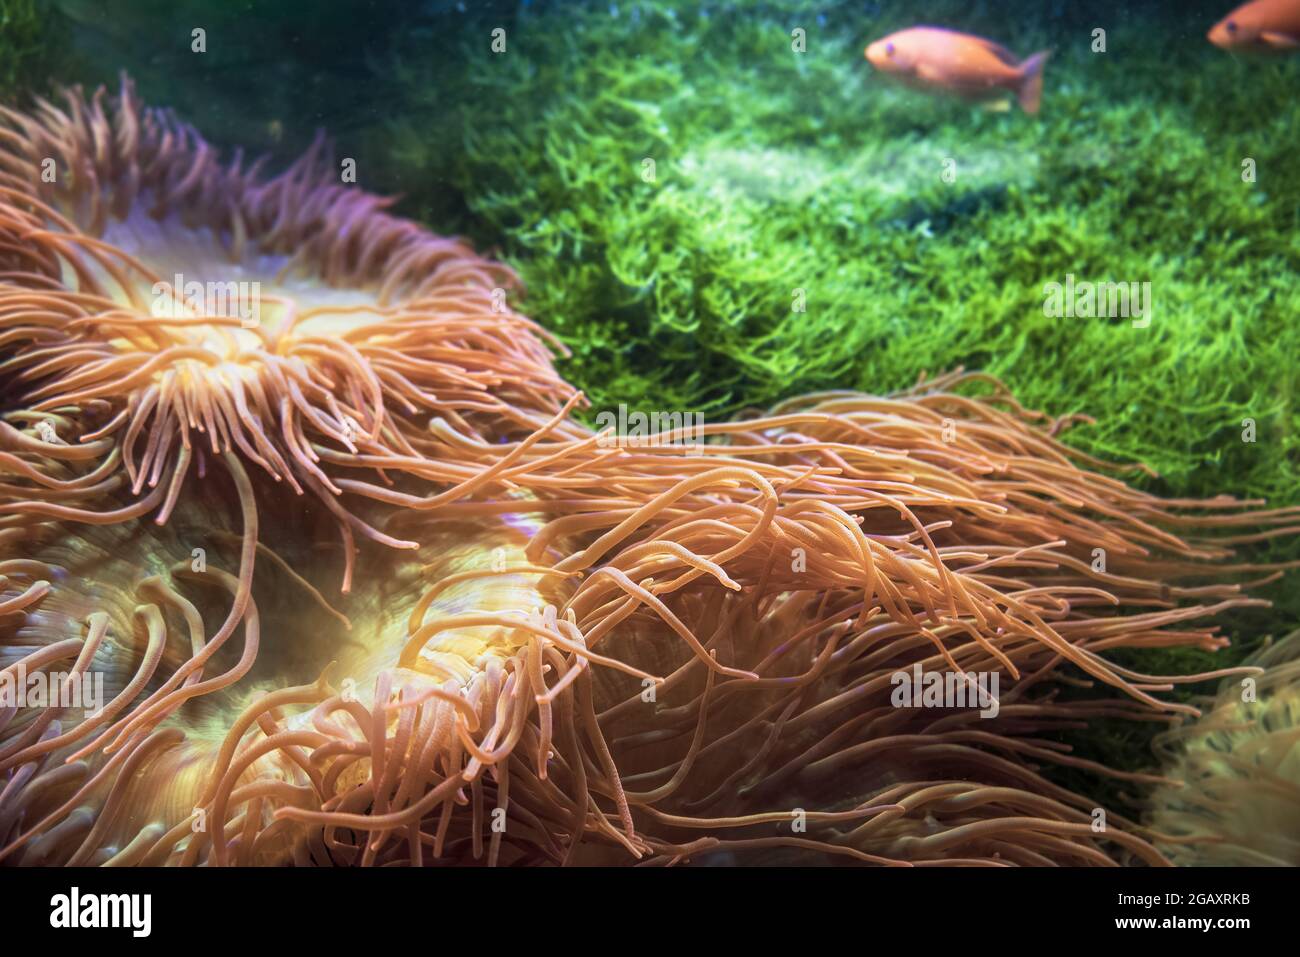 underwater background with bubble-tip anemones seaweeds and swimming blurred pink fishes Stock Photo